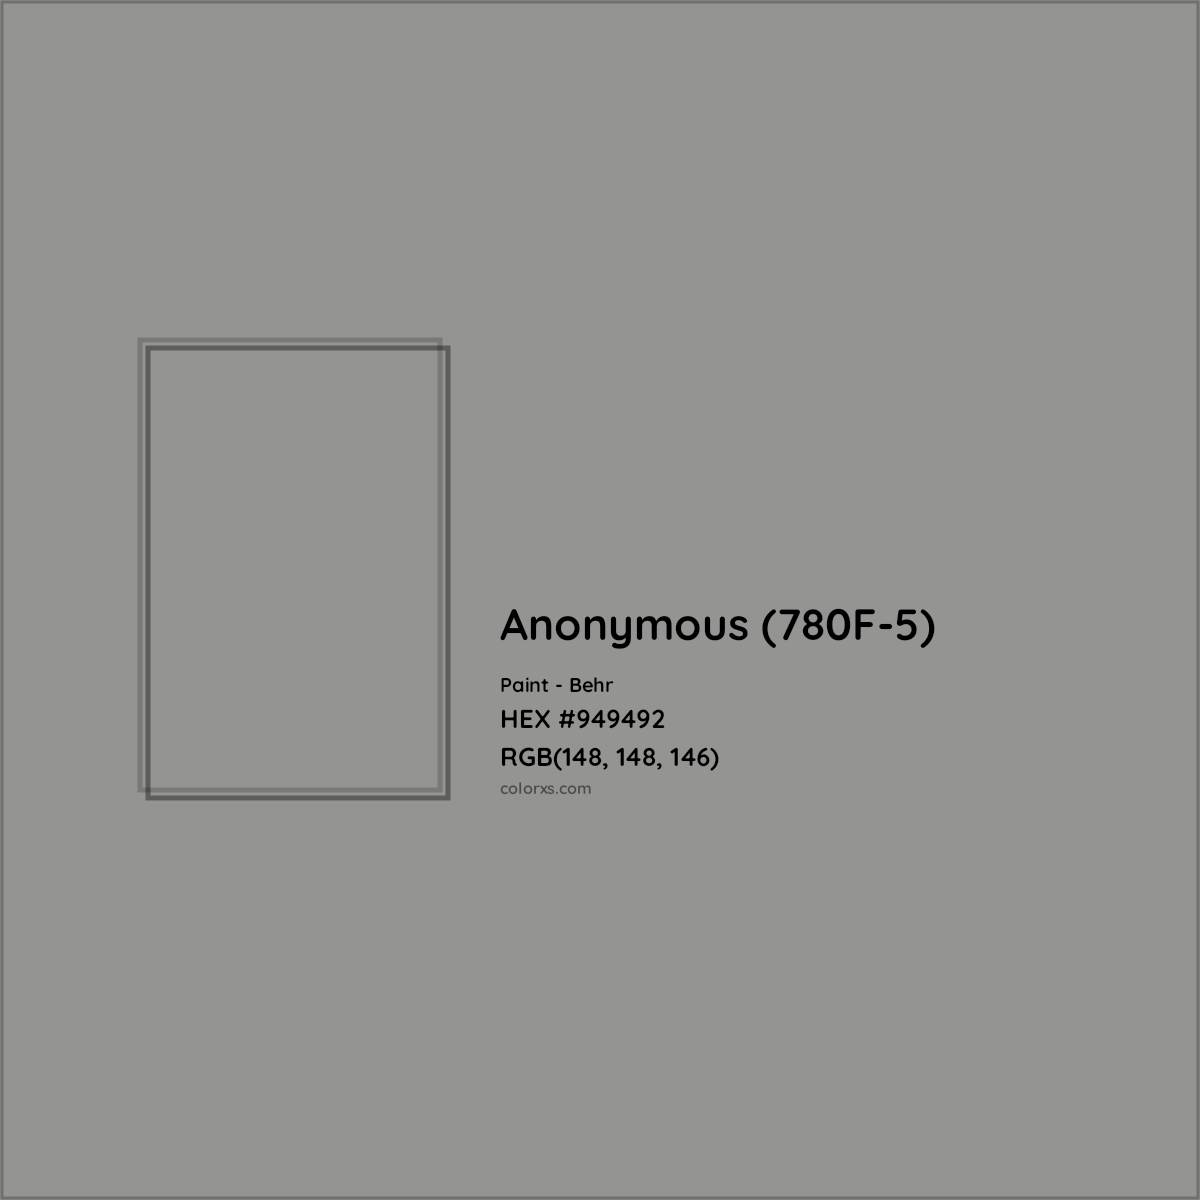 HEX #949492 Anonymous (780F-5) Paint Behr - Color Code